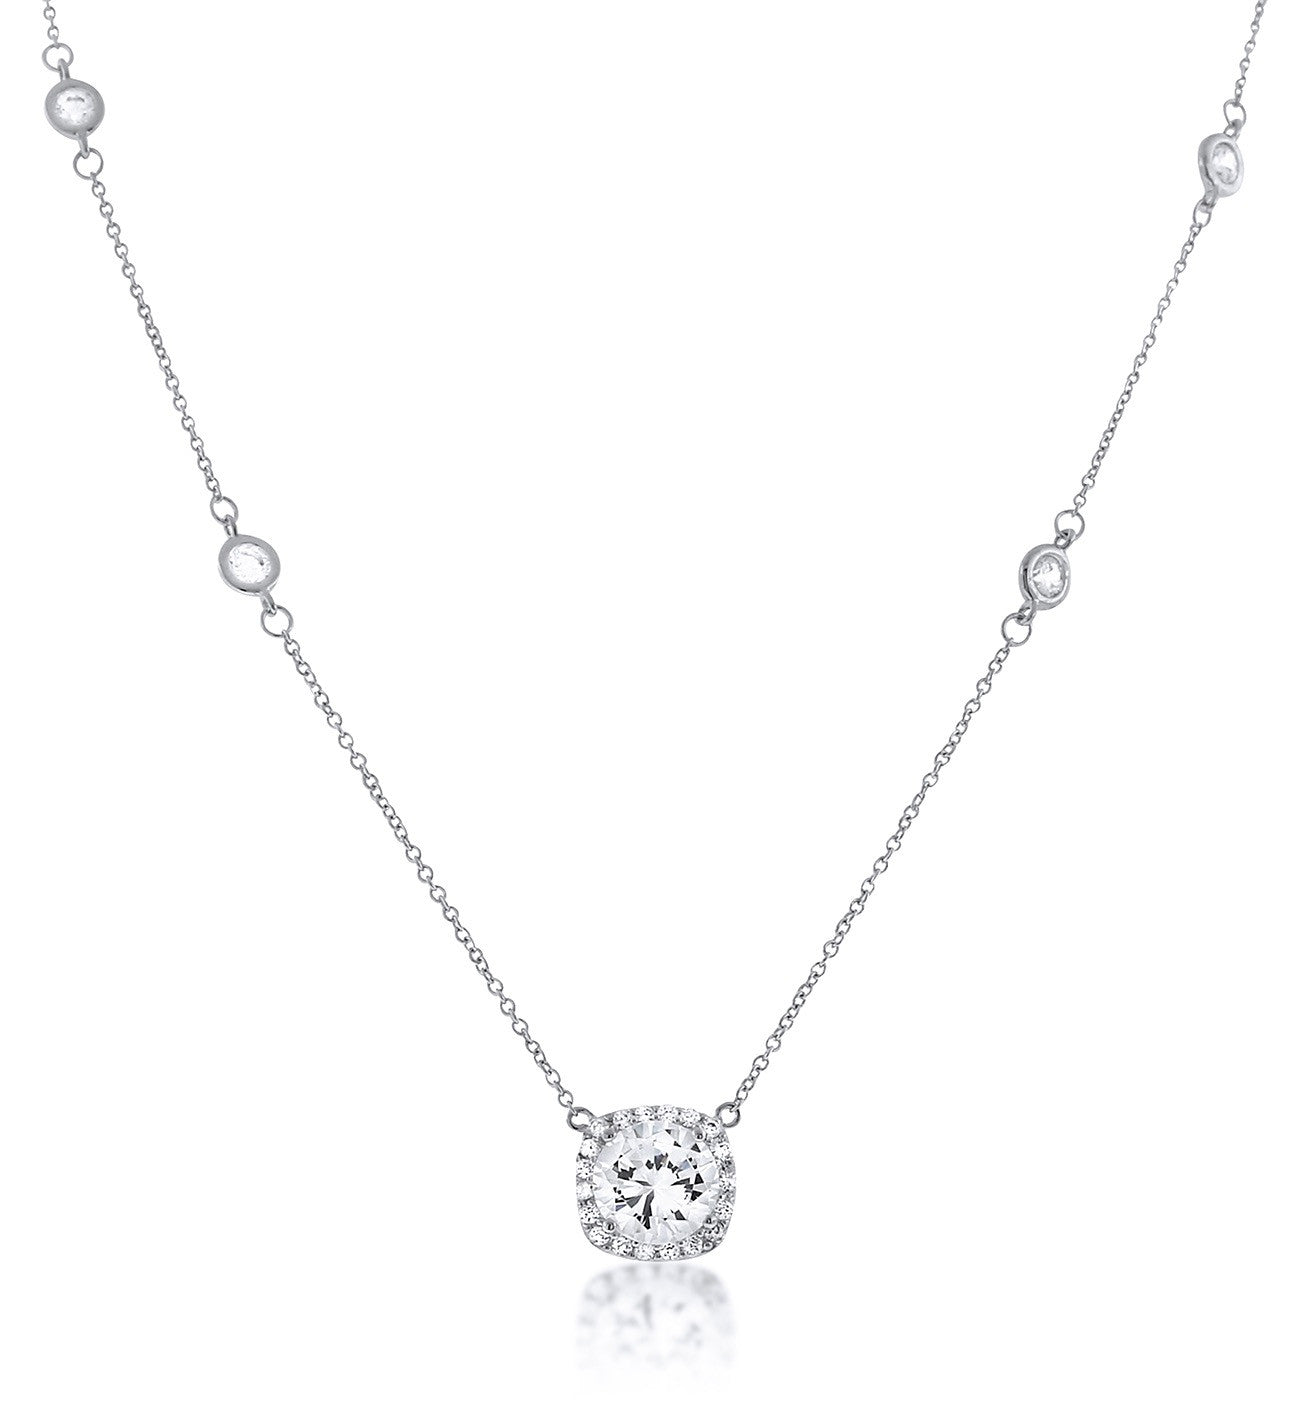 Chandi Diamond Pendant Necklance with Halo and  Adorned with Round Stones by the Yard by Bobby Schandra